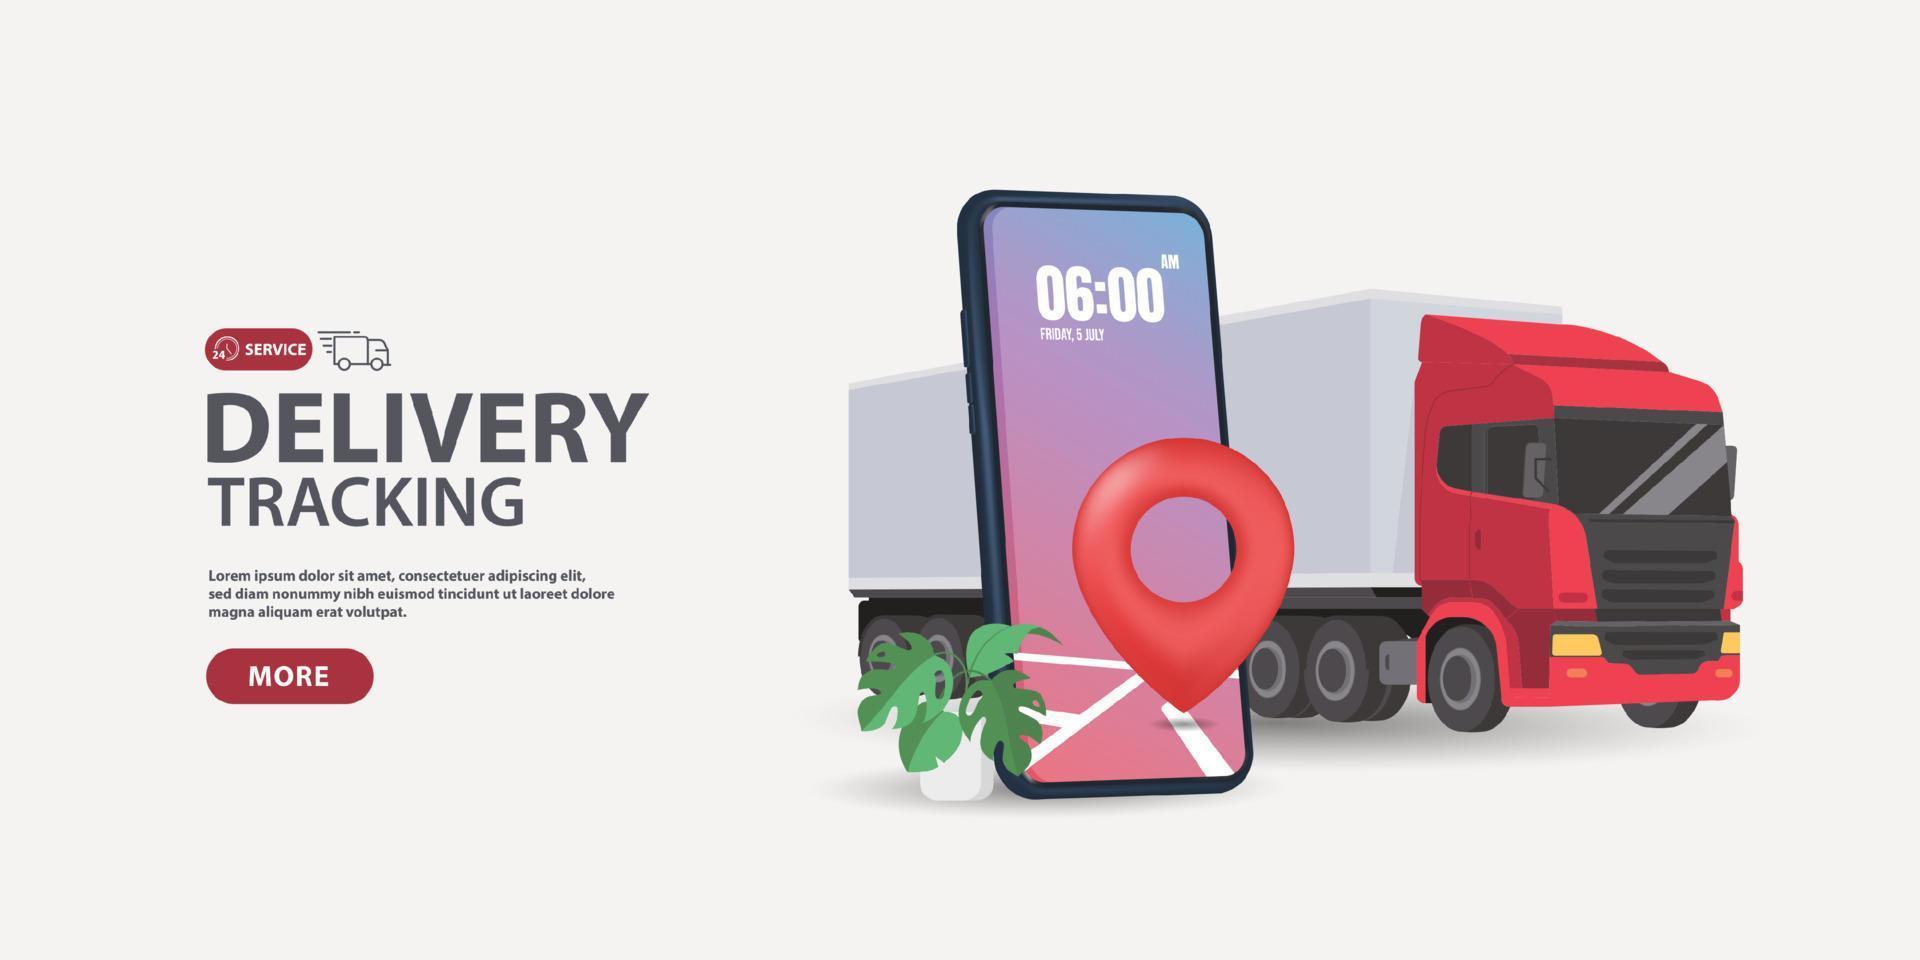 3D Express delivery service by truck. Checking delivery service app on mobile phone. vector